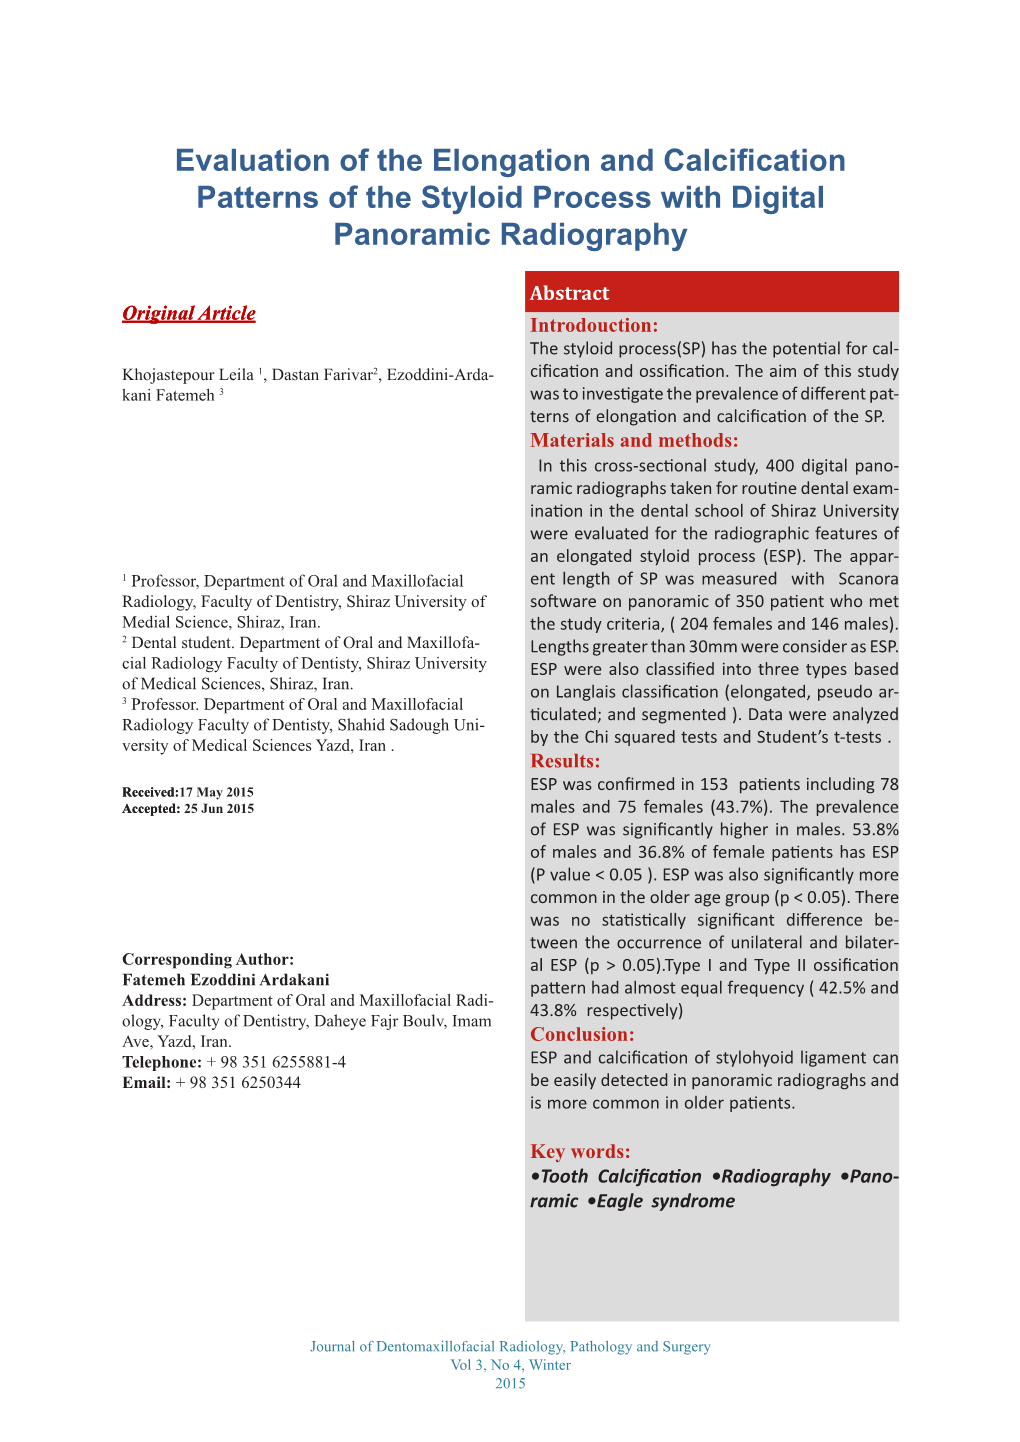 Evaluation of the Elongation and Calcification Patterns of the Styloid Process with Digital Panoramic Radiography